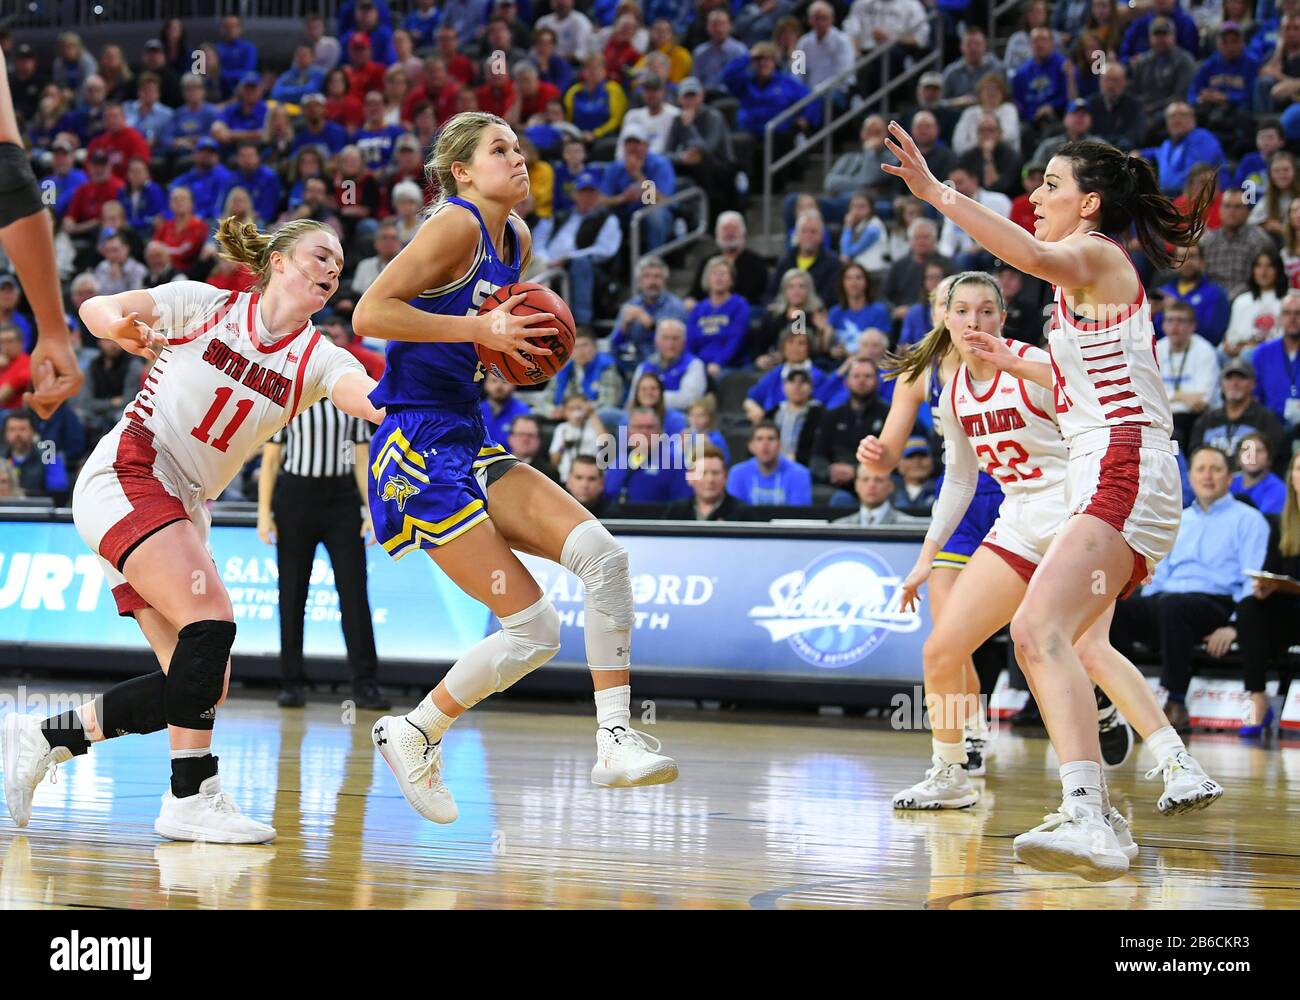 March 10, 2020: South Dakota State Jackrabbits guard Tylee Irwin (21) goes up for a shot during the Summit League women's championship basketball game between the South Dakota State Jackrabbits and the South Dakota Coyotes at the Denny Sanford Premier Center, Sioux Falls, SD. South Dakota defeated South Dakota State 63-58 and move on to the NCAA tournament. Photo by Russell Hons/CSM Stock Photo